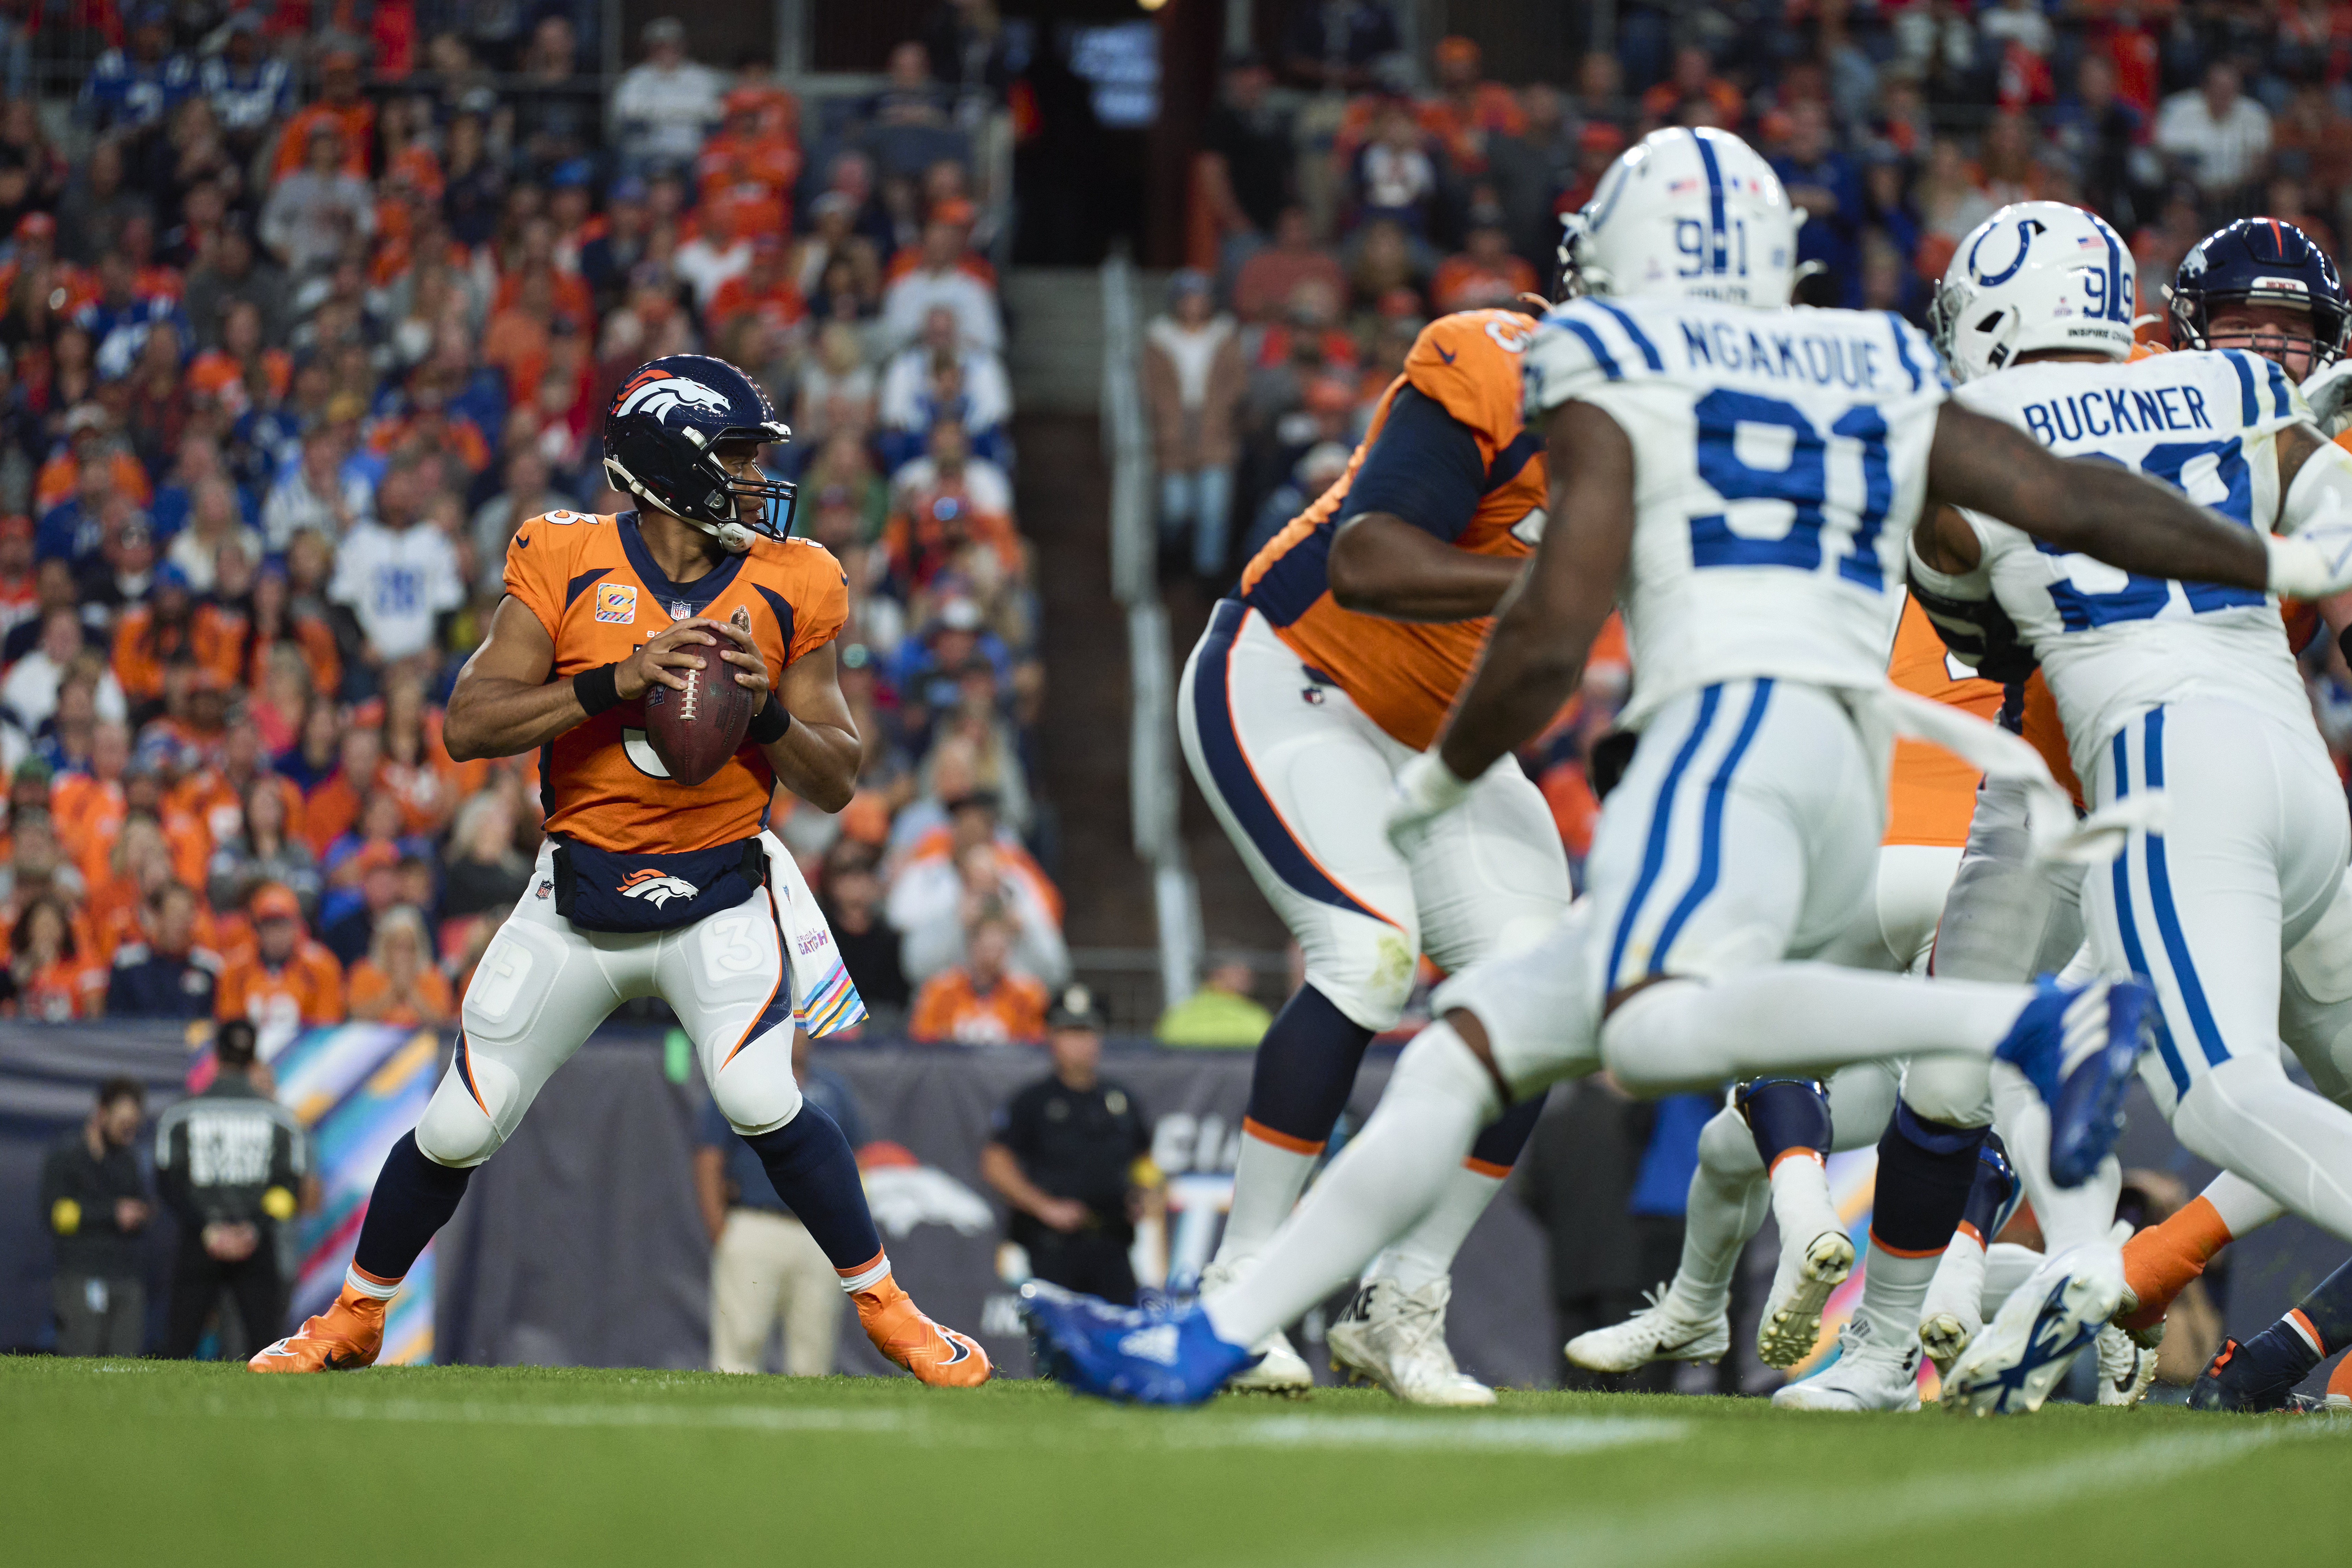 Quarterback Russell Wilson (L) of the Denver Broncos looks to pass in the game against the Indianapolis Colts at Mile High in Denver, Colorado, October 6, 2022. /CFP